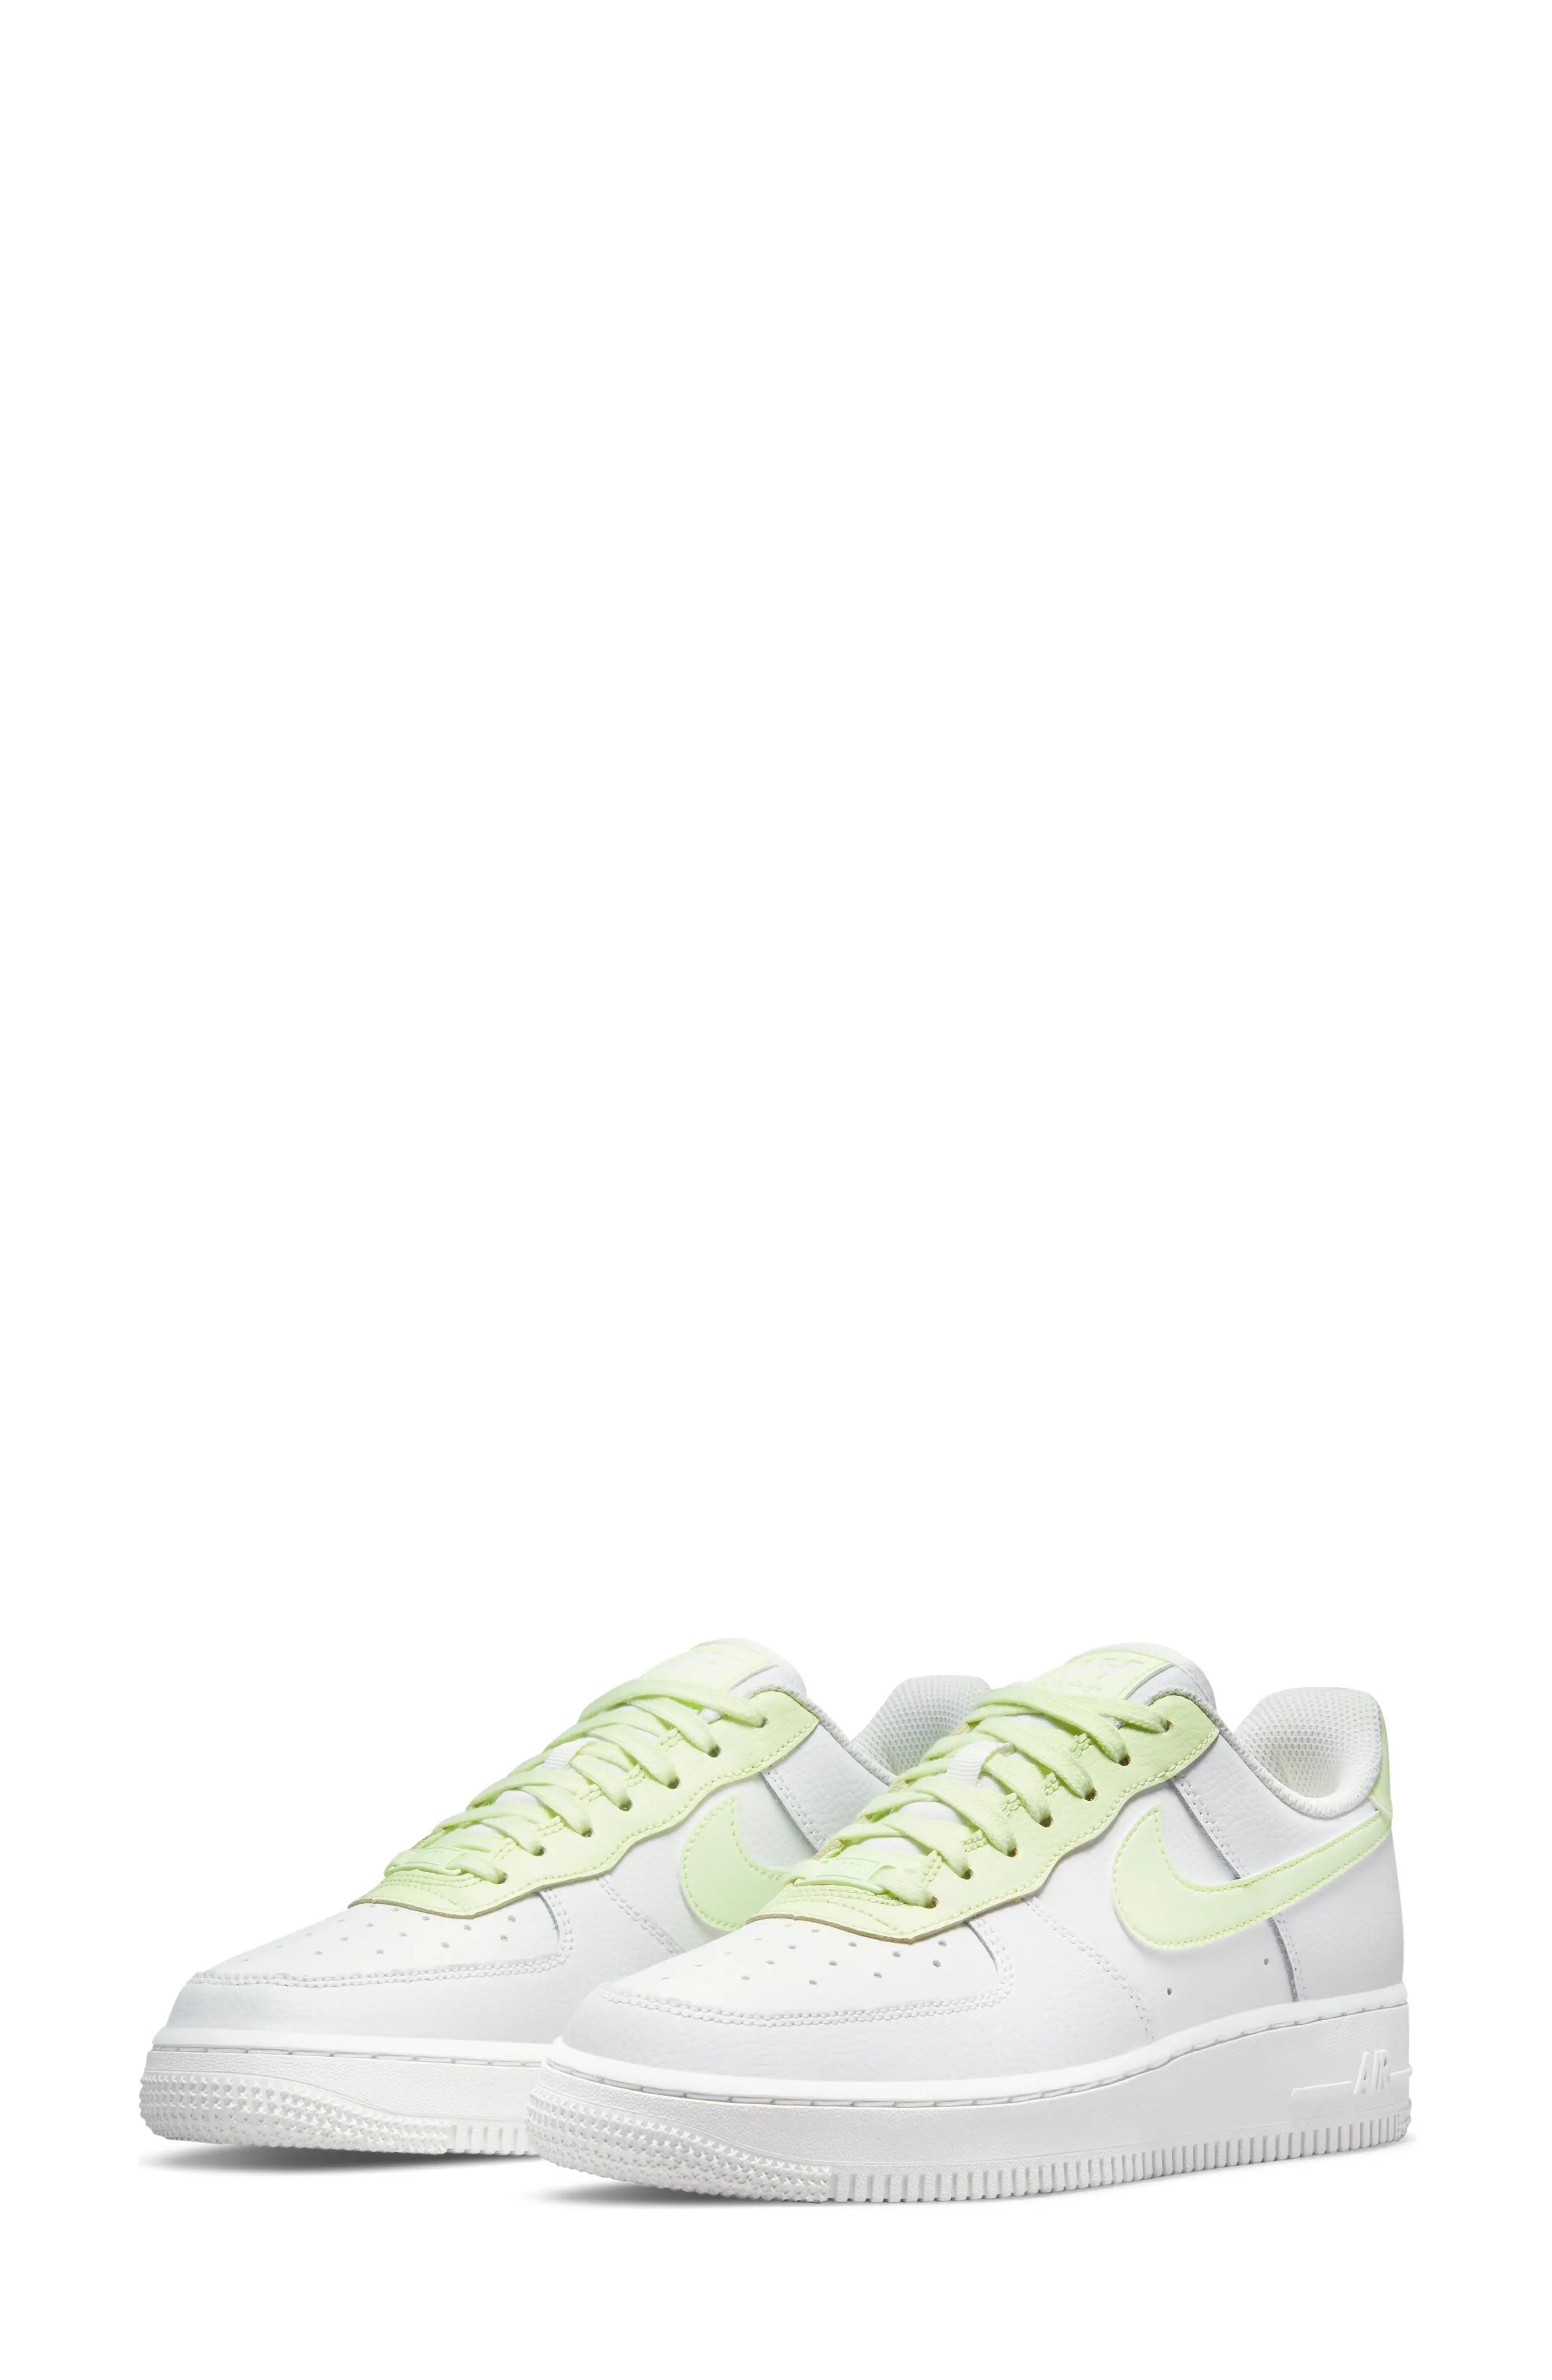 Nike Air Force 1 '07 Sneaker, Size 9 in Summit White/Lime Ice/Summit at Nordstrom | Nordstrom